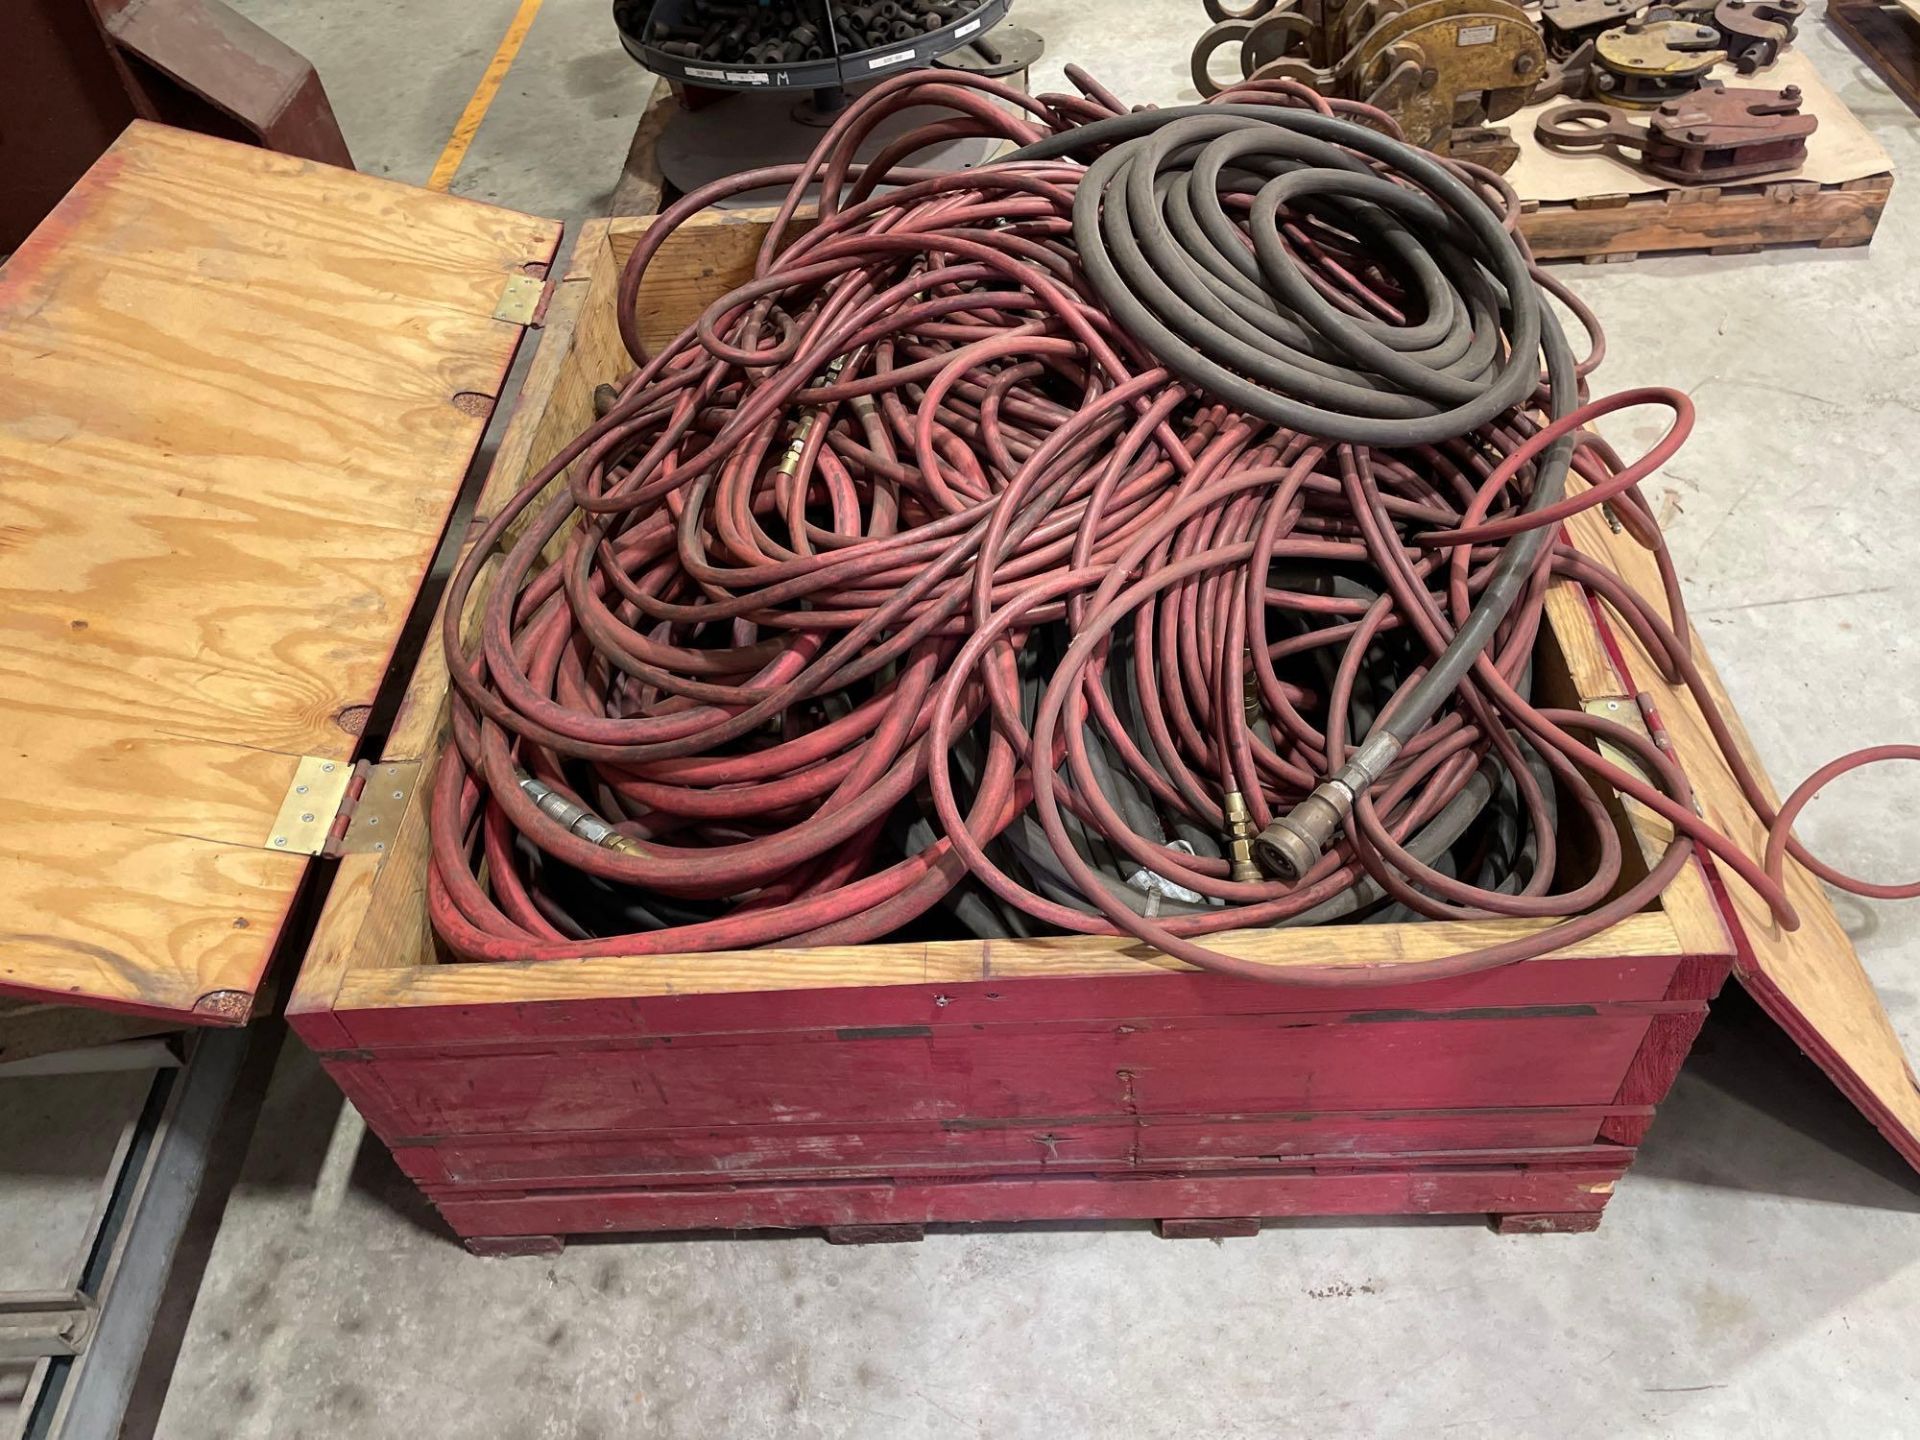 Crate of Hoses